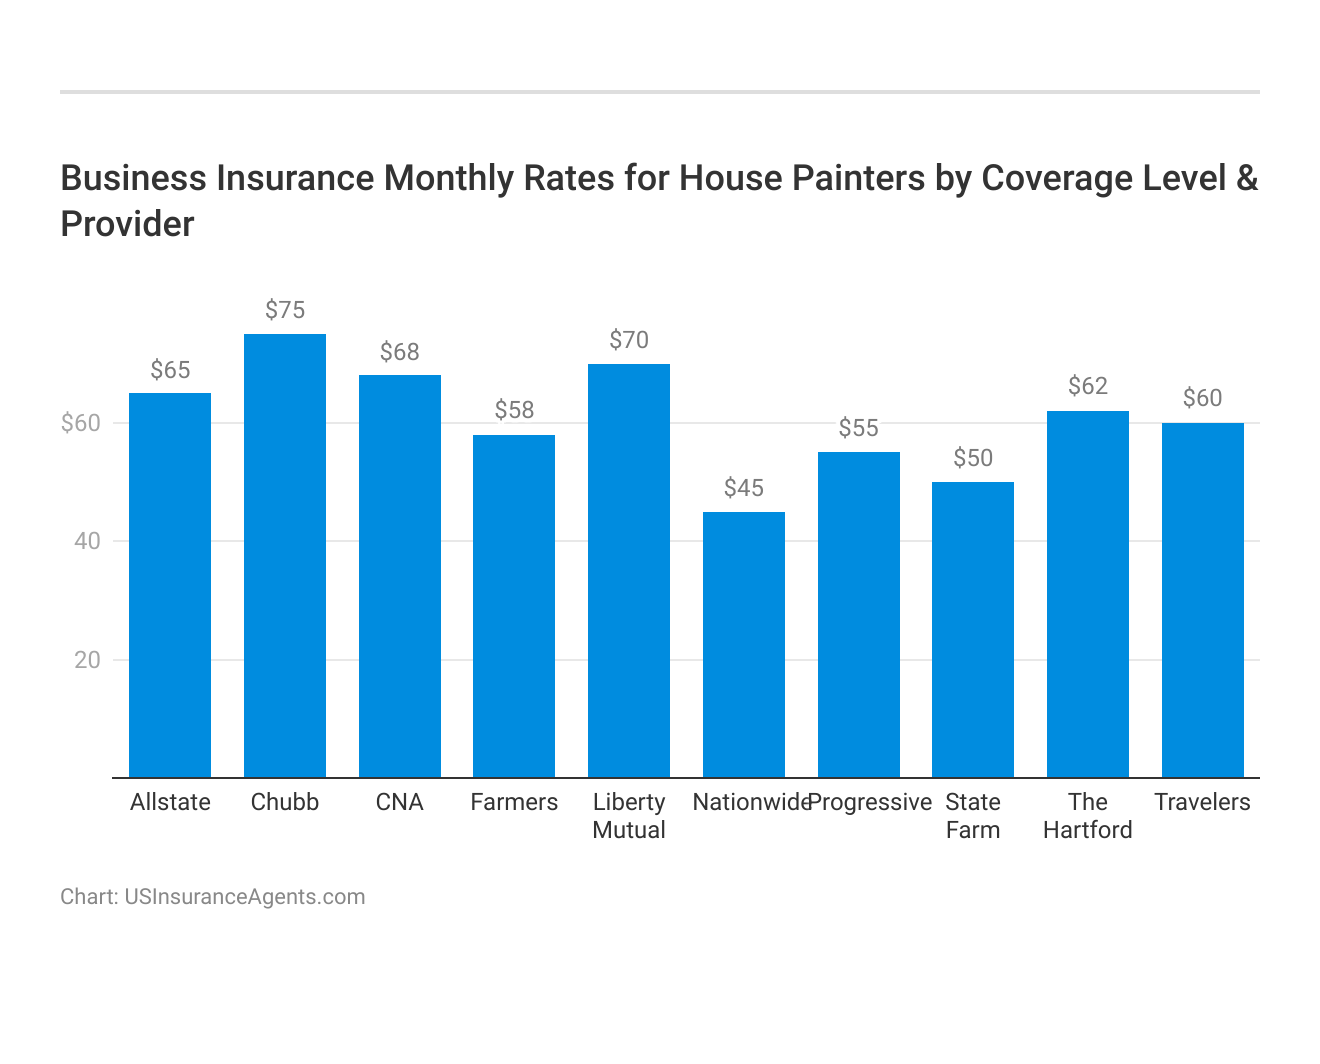 <h3>Business Insurance Monthly Rates for House Painters by Coverage Level & Provider</h3>